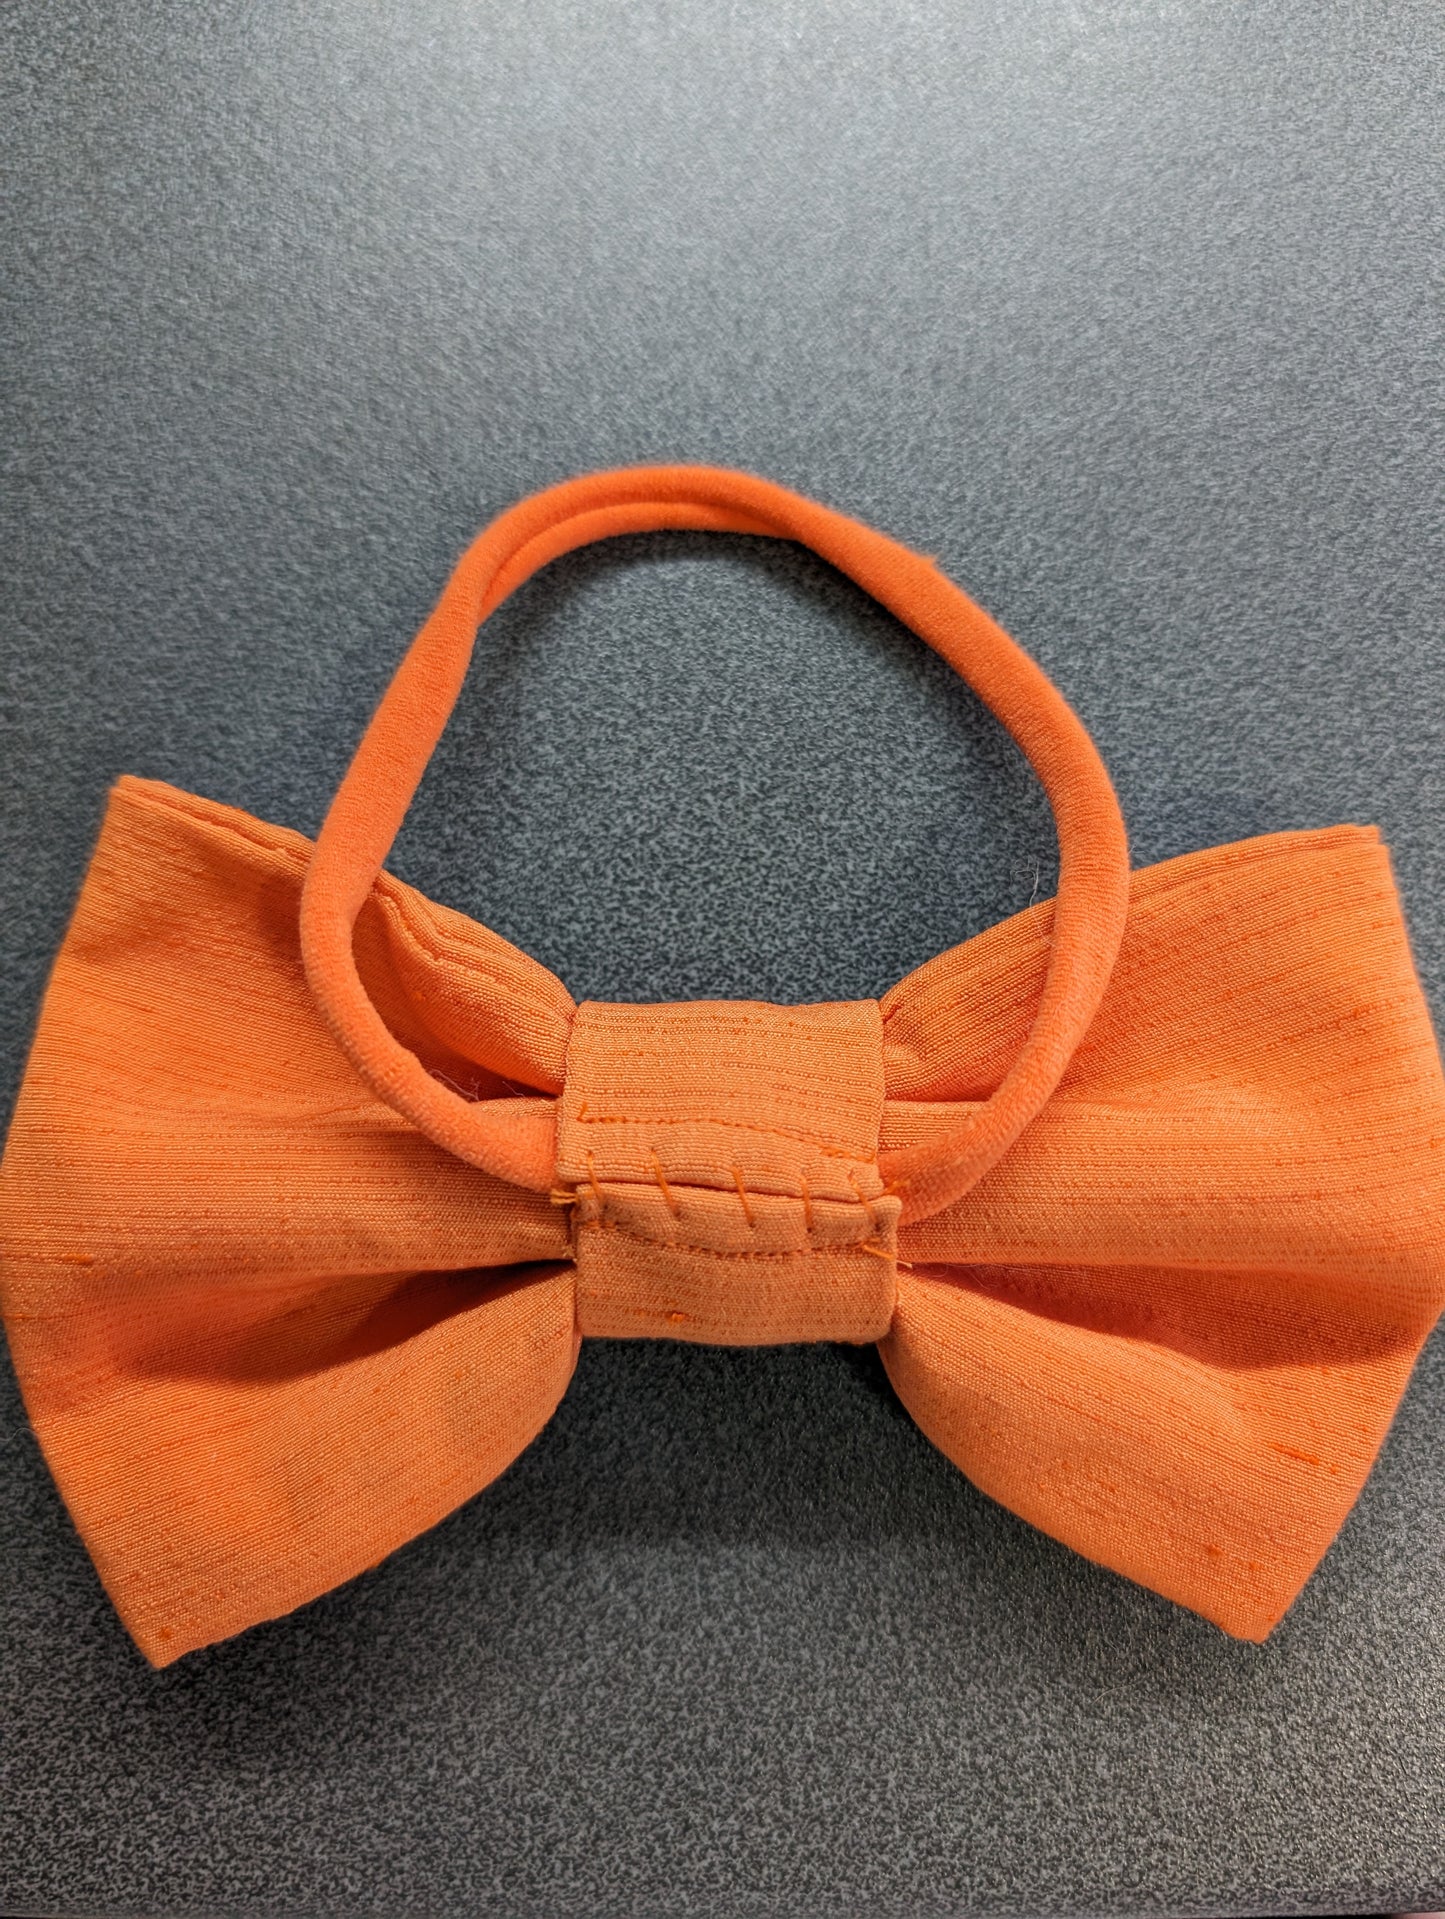 Dog bows with elastic neck strap